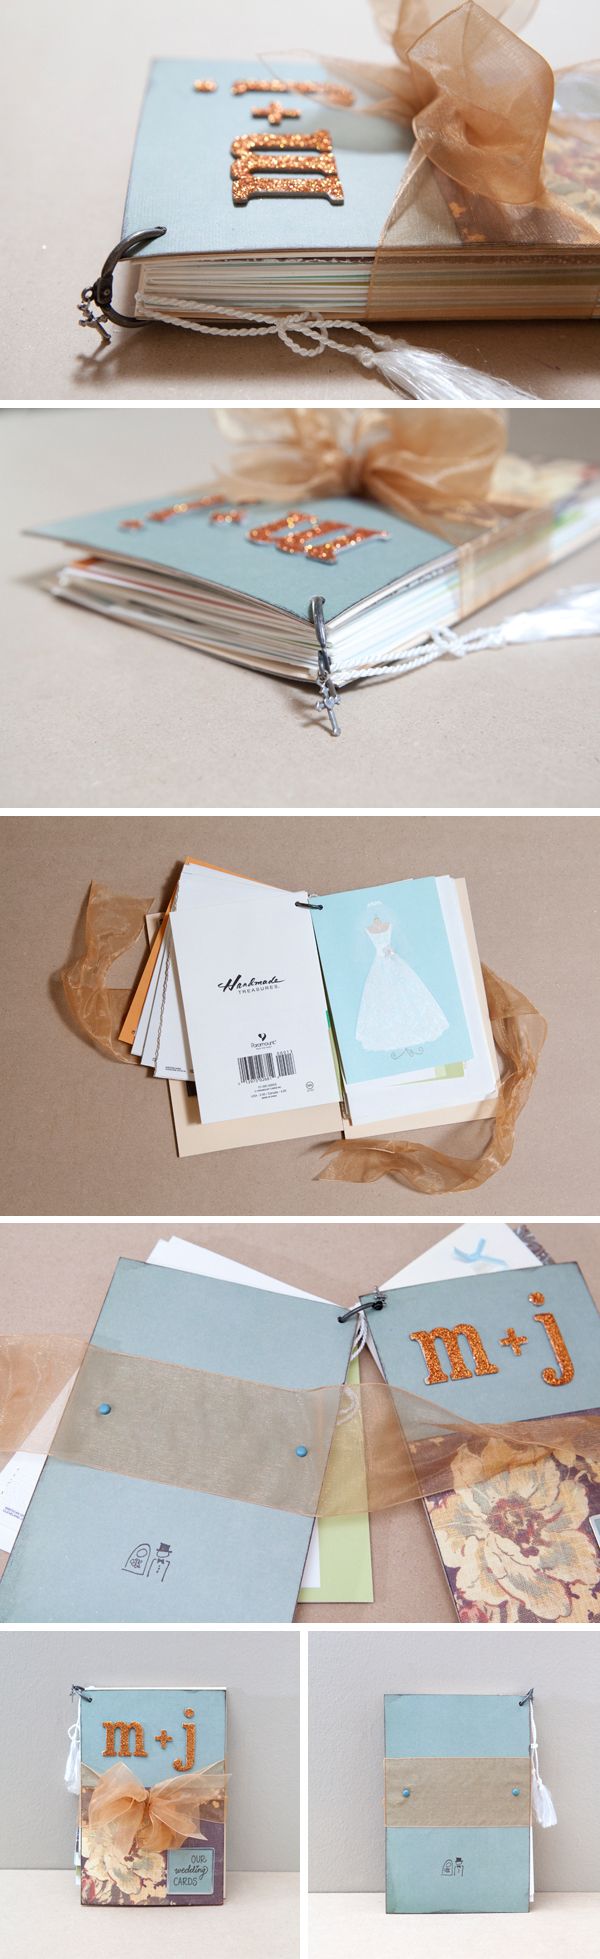 Make a book with all your wedding cards. Cute idea!